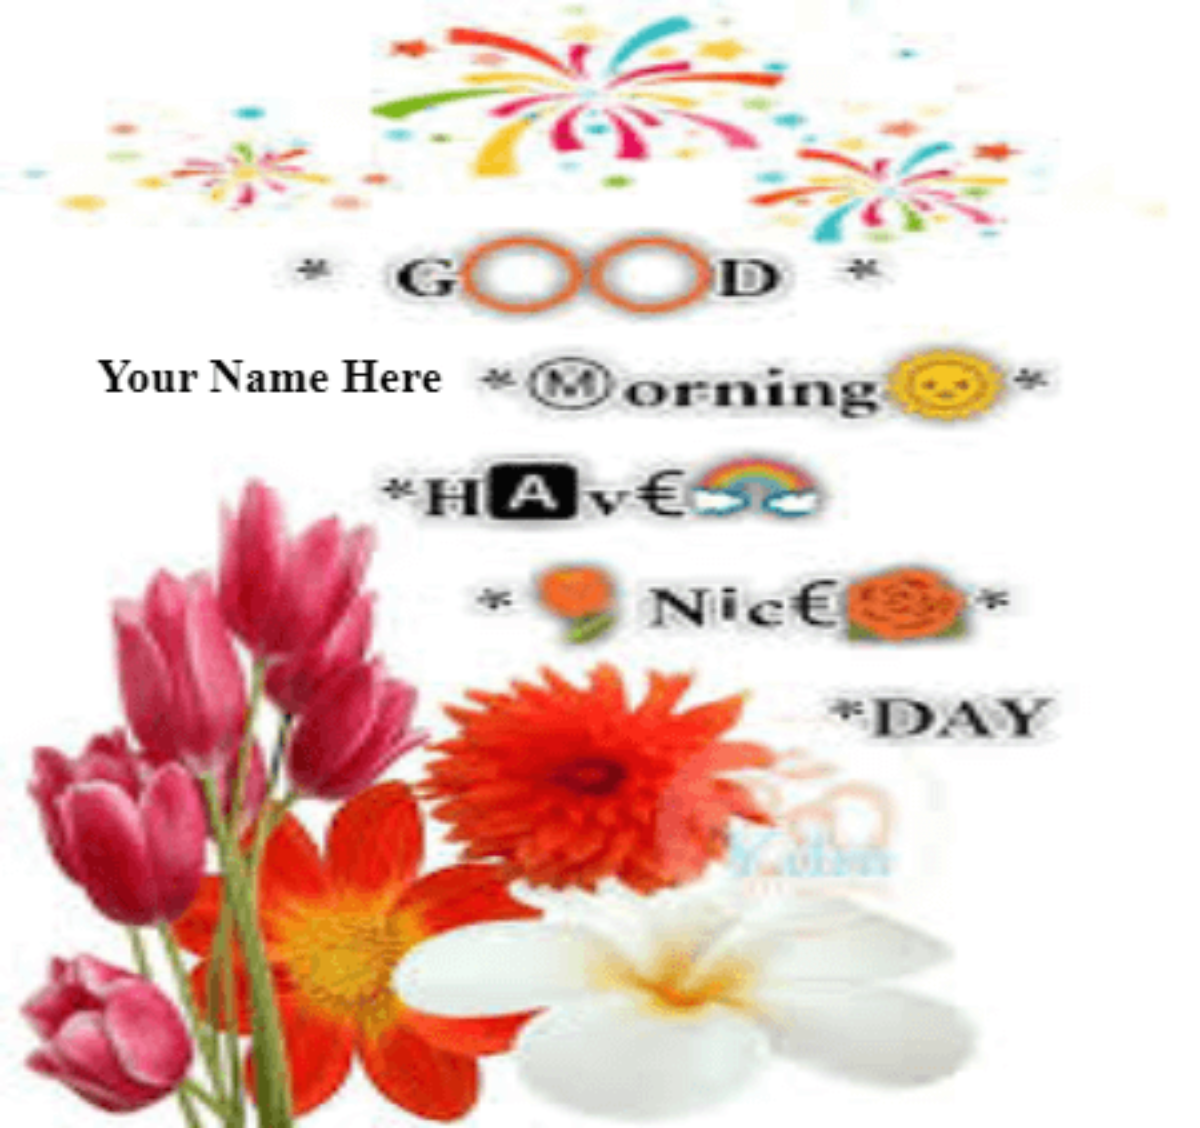 Good Morning on Beautiful card - Good Morning Wishes With Name